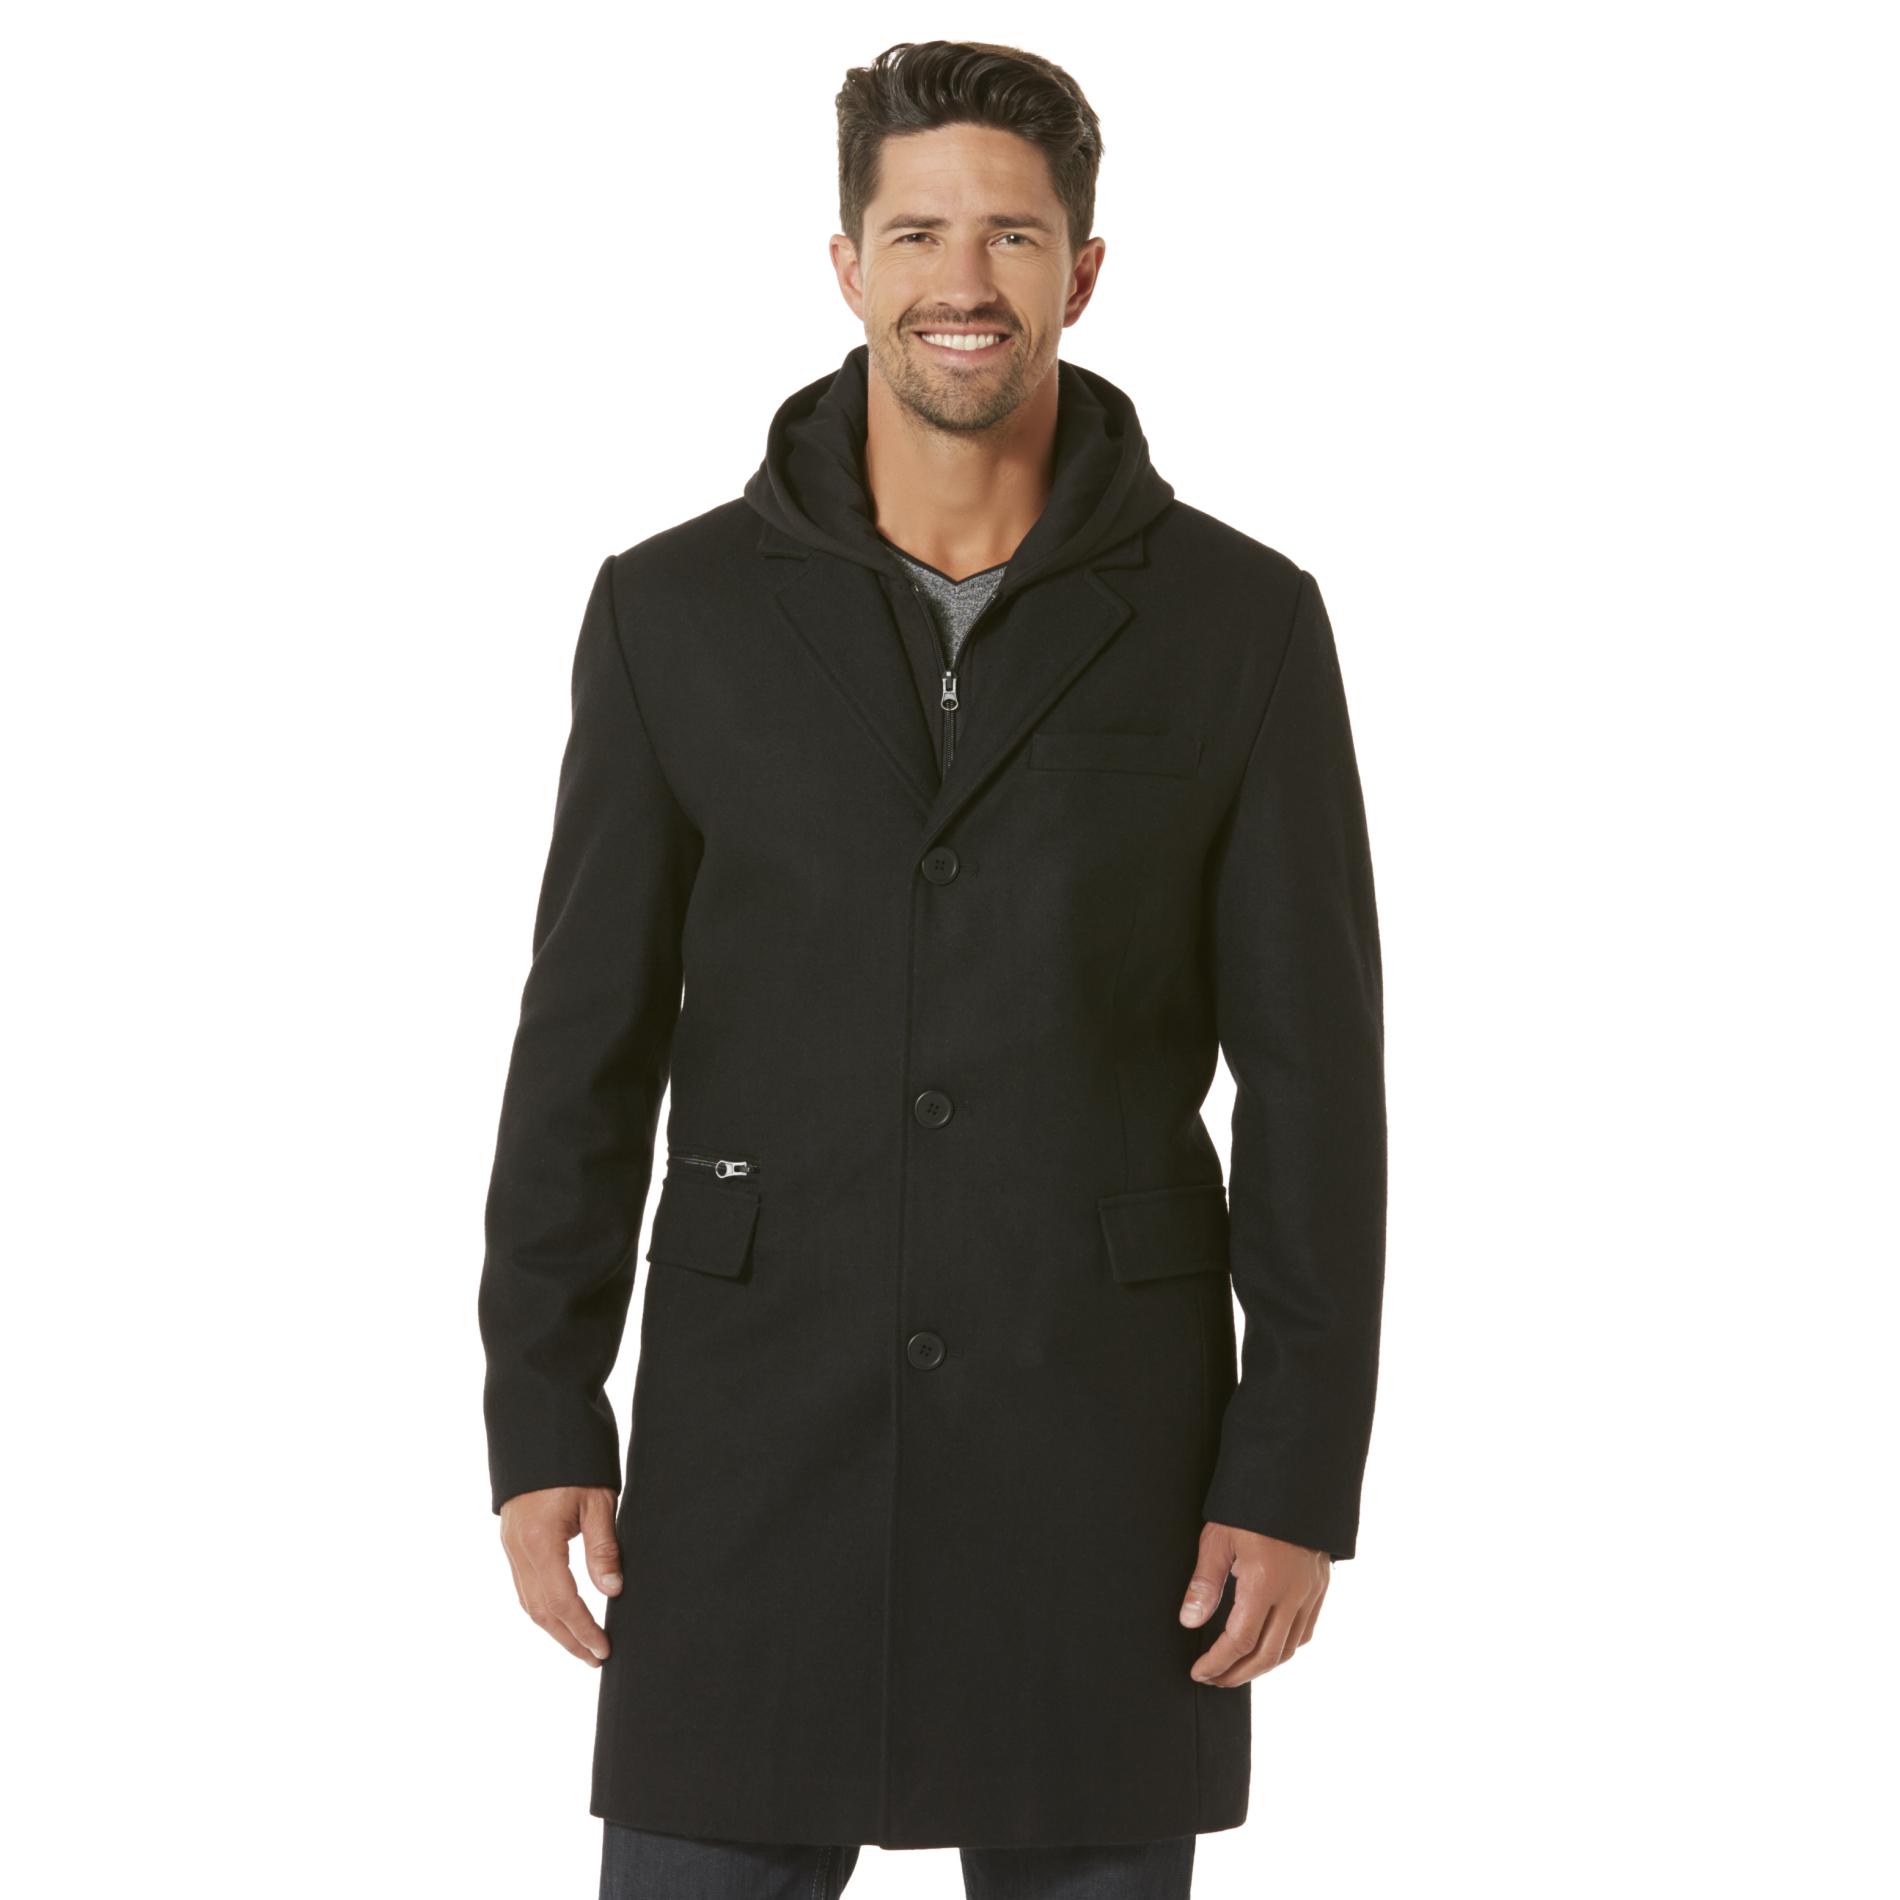 Men&39s Wool-Blend Trench Coat: Shop Outerwear at Sears